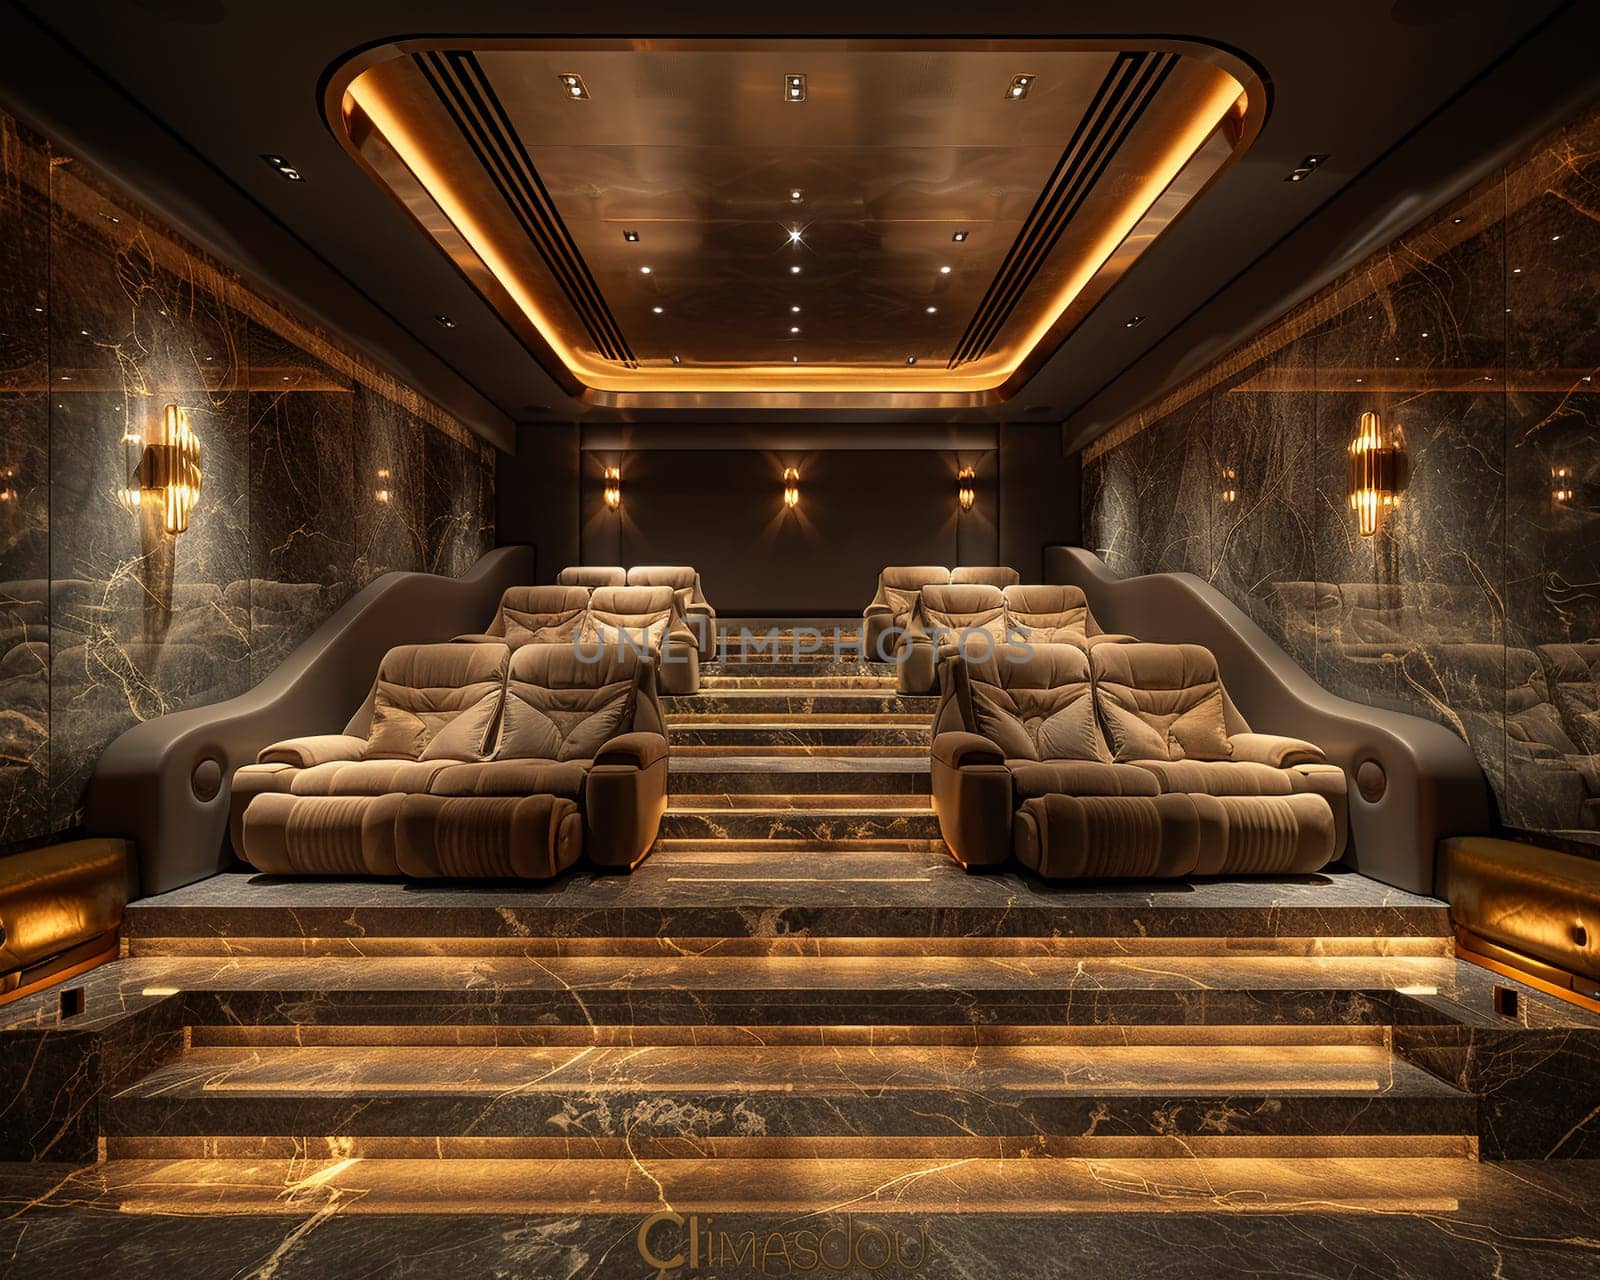 Luxurious home theater with plush seating and state-of-the-art sound systemup32K HD by Benzoix